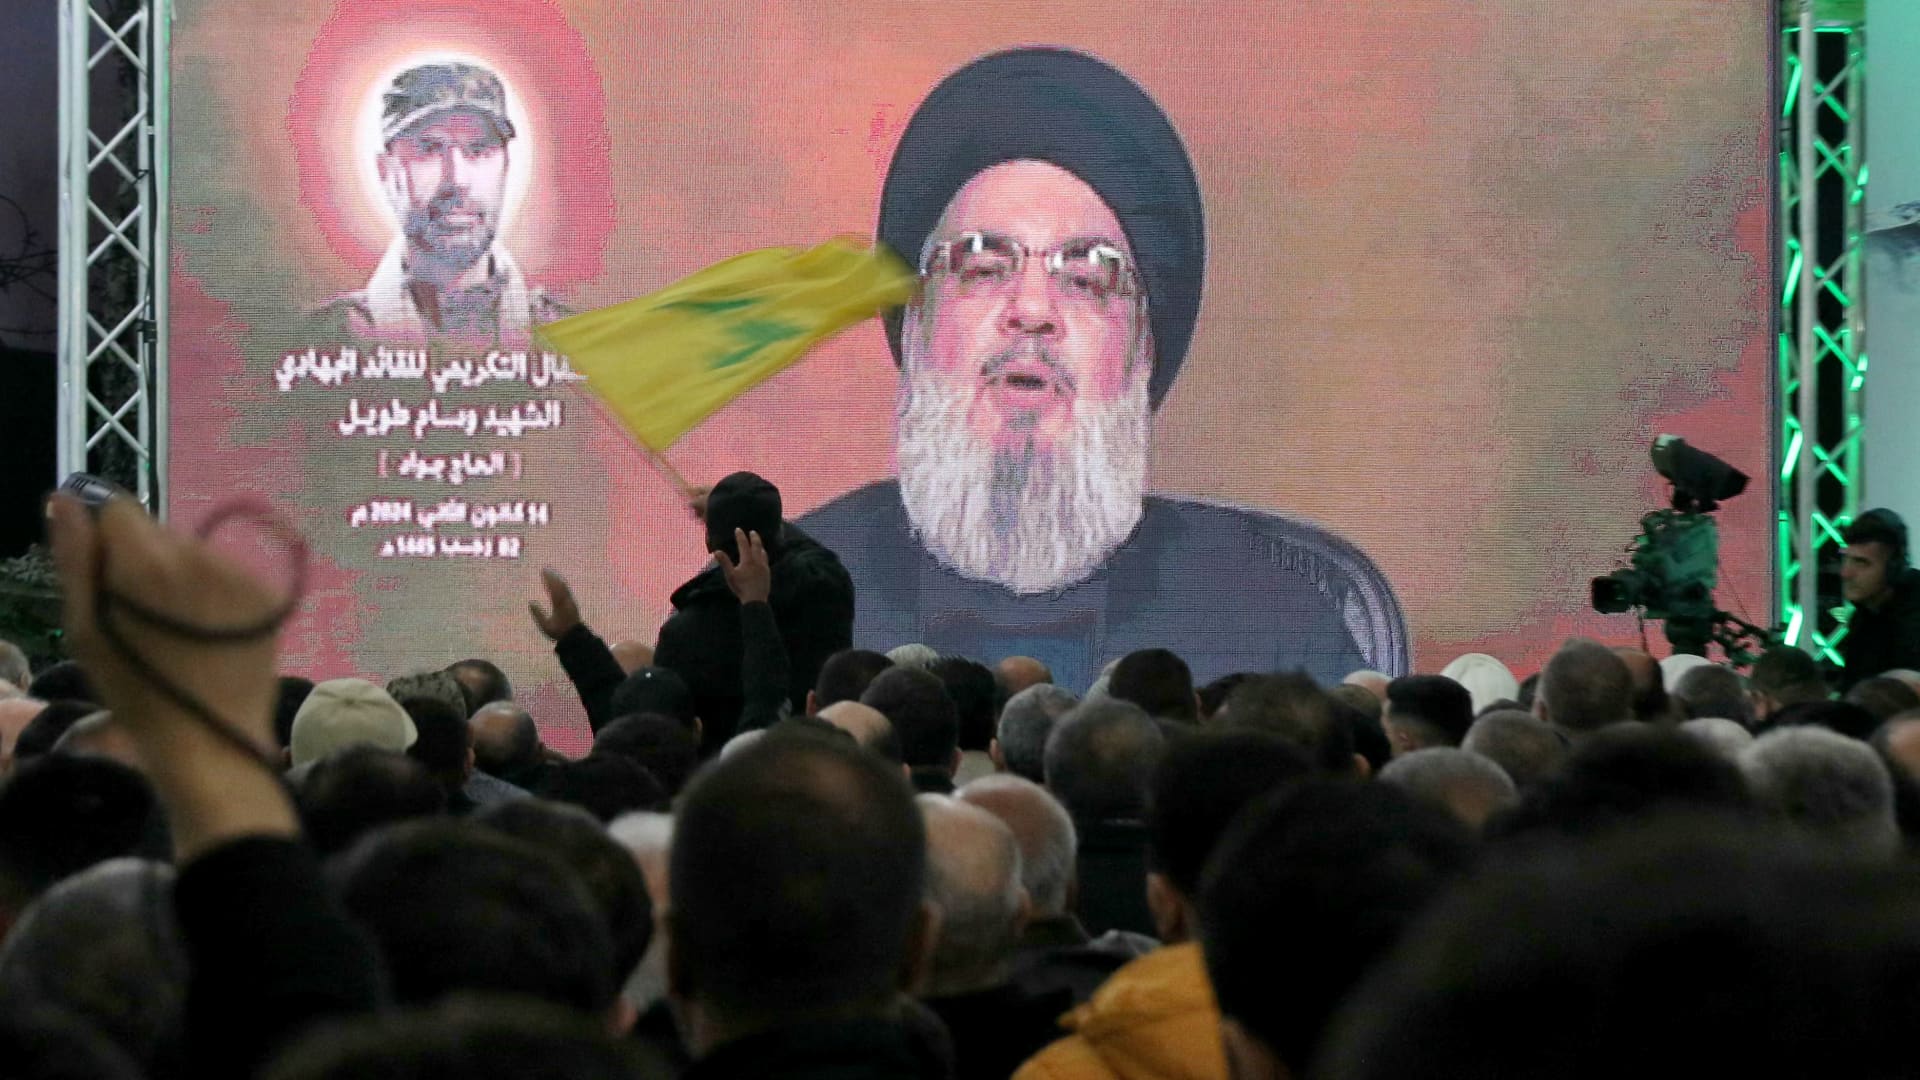 A man waves a Hezbollah movement flag as its leader Hassan Nasrallah delivers a televised speech in Kherbet Selm in southern Lebanon on January 14, 2024, marking the one week memorial since the killing top field commander Wissam Tawil.